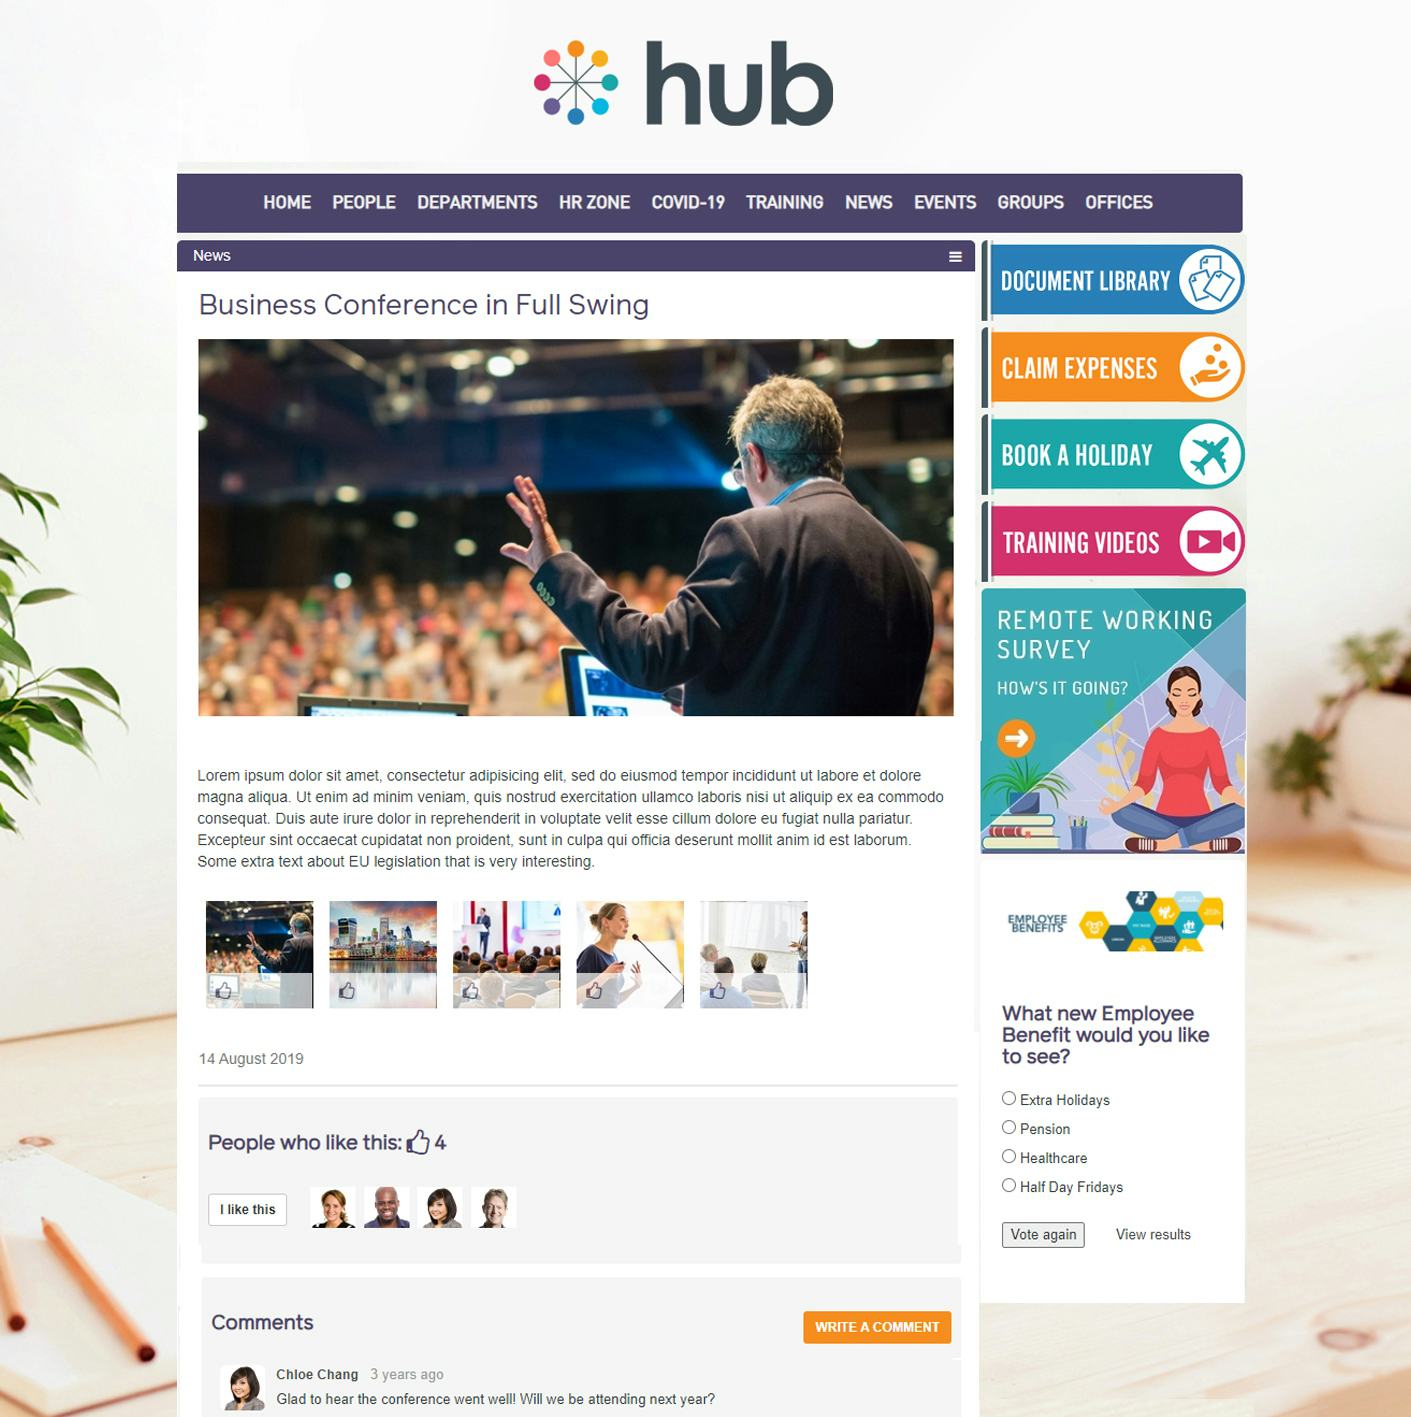 Hub Software - News Article, featuring image galleries, social liking and commenting, as well as secondary links and content including polls and surveys